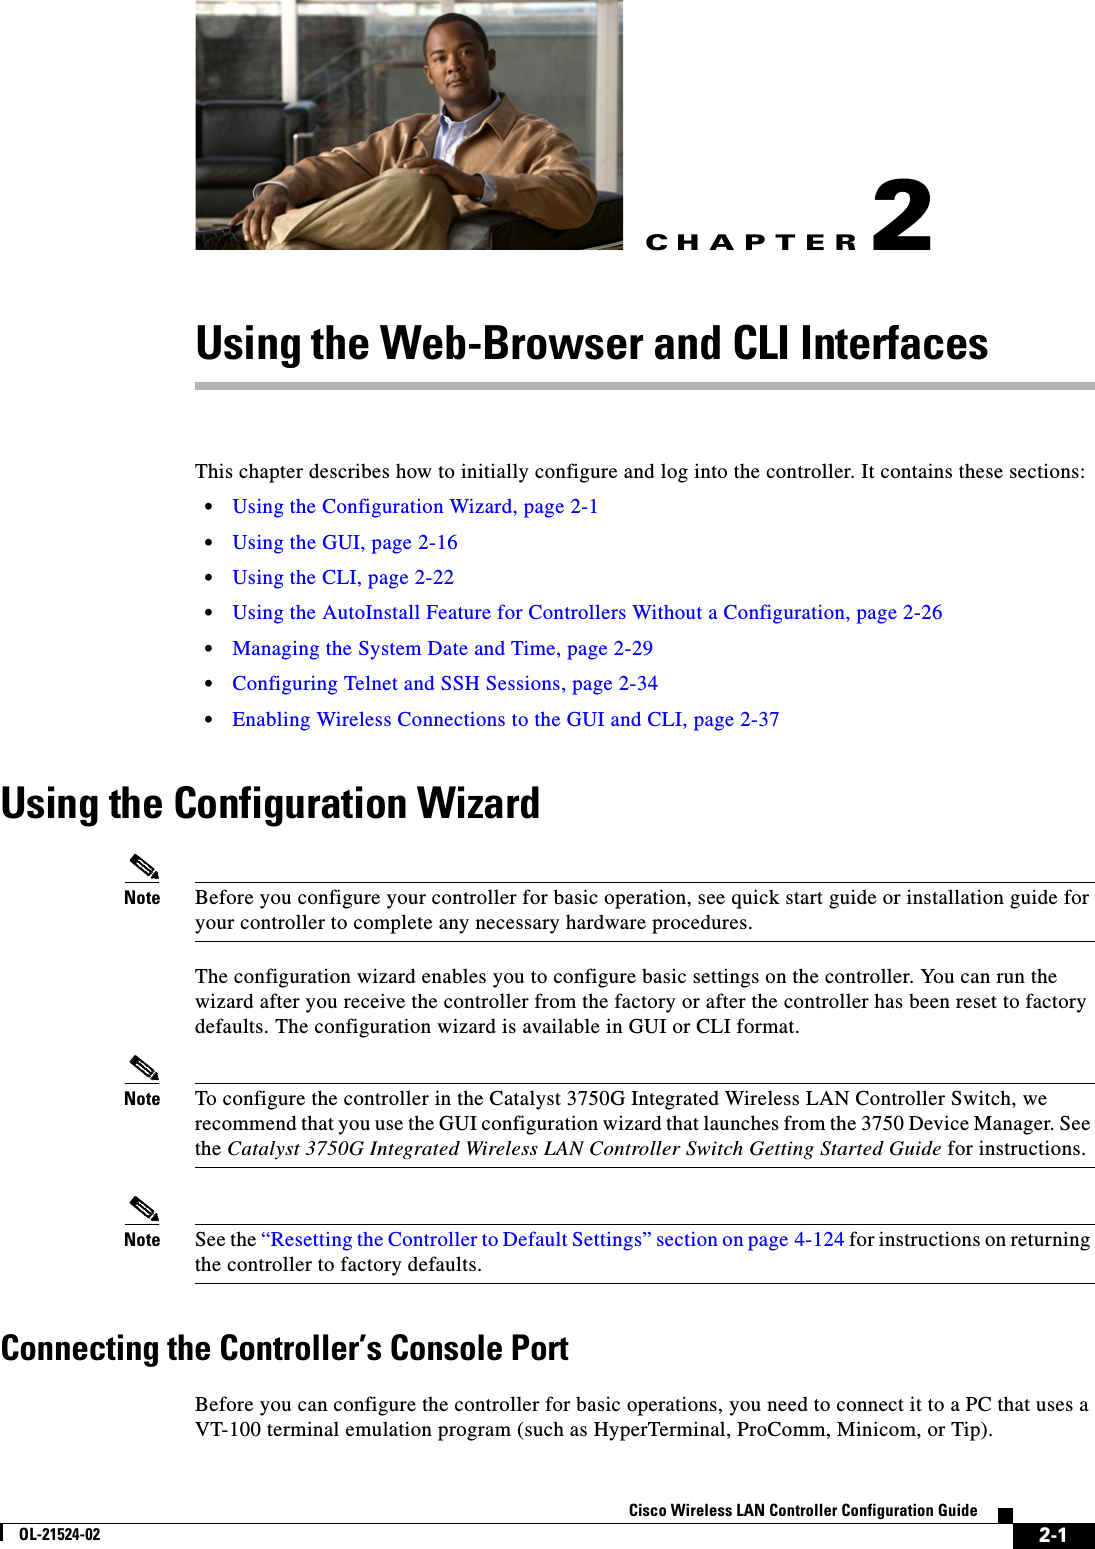 CHAPTER2-1Cisco Wireless LAN Controller Configuration GuideOL-21524-022Using the Web-Browser and CLI InterfacesThis chapter describes how to initially configure and log into the controller. It contains these sections:  • Using the Configuration Wizard, page 2-1  • Using the GUI, page 2-16  • Using the CLI, page 2-22  • Using the AutoInstall Feature for Controllers Without a Configuration, page 2-26  • Managing the System Date and Time, page 2-29  • Configuring Telnet and SSH Sessions, page 2-34  • Enabling Wireless Connections to the GUI and CLI, page 2-37Using the Configuration WizardNote Before you configure your controller for basic operation, see quick start guide or installation guide for your controller to complete any necessary hardware procedures.The configuration wizard enables you to configure basic settings on the controller. You can run the wizard after you receive the controller from the factory or after the controller has been reset to factory defaults. The configuration wizard is available in GUI or CLI format.Note To configure the controller in the Catalyst 3750G Integrated Wireless LAN Controller Switch, we recommend that you use the GUI configuration wizard that launches from the 3750 Device Manager. See the Catalyst 3750G Integrated Wireless LAN Controller Switch Getting Started Guide for instructions.Note See the “Resetting the Controller to Default Settings” section on page 4-124 for instructions on returning the controller to factory defaults.Connecting the Controller’s Console PortBefore you can configure the controller for basic operations, you need to connect it to a PC that uses a VT-100 terminal emulation program (such as HyperTerminal, ProComm, Minicom, or Tip).